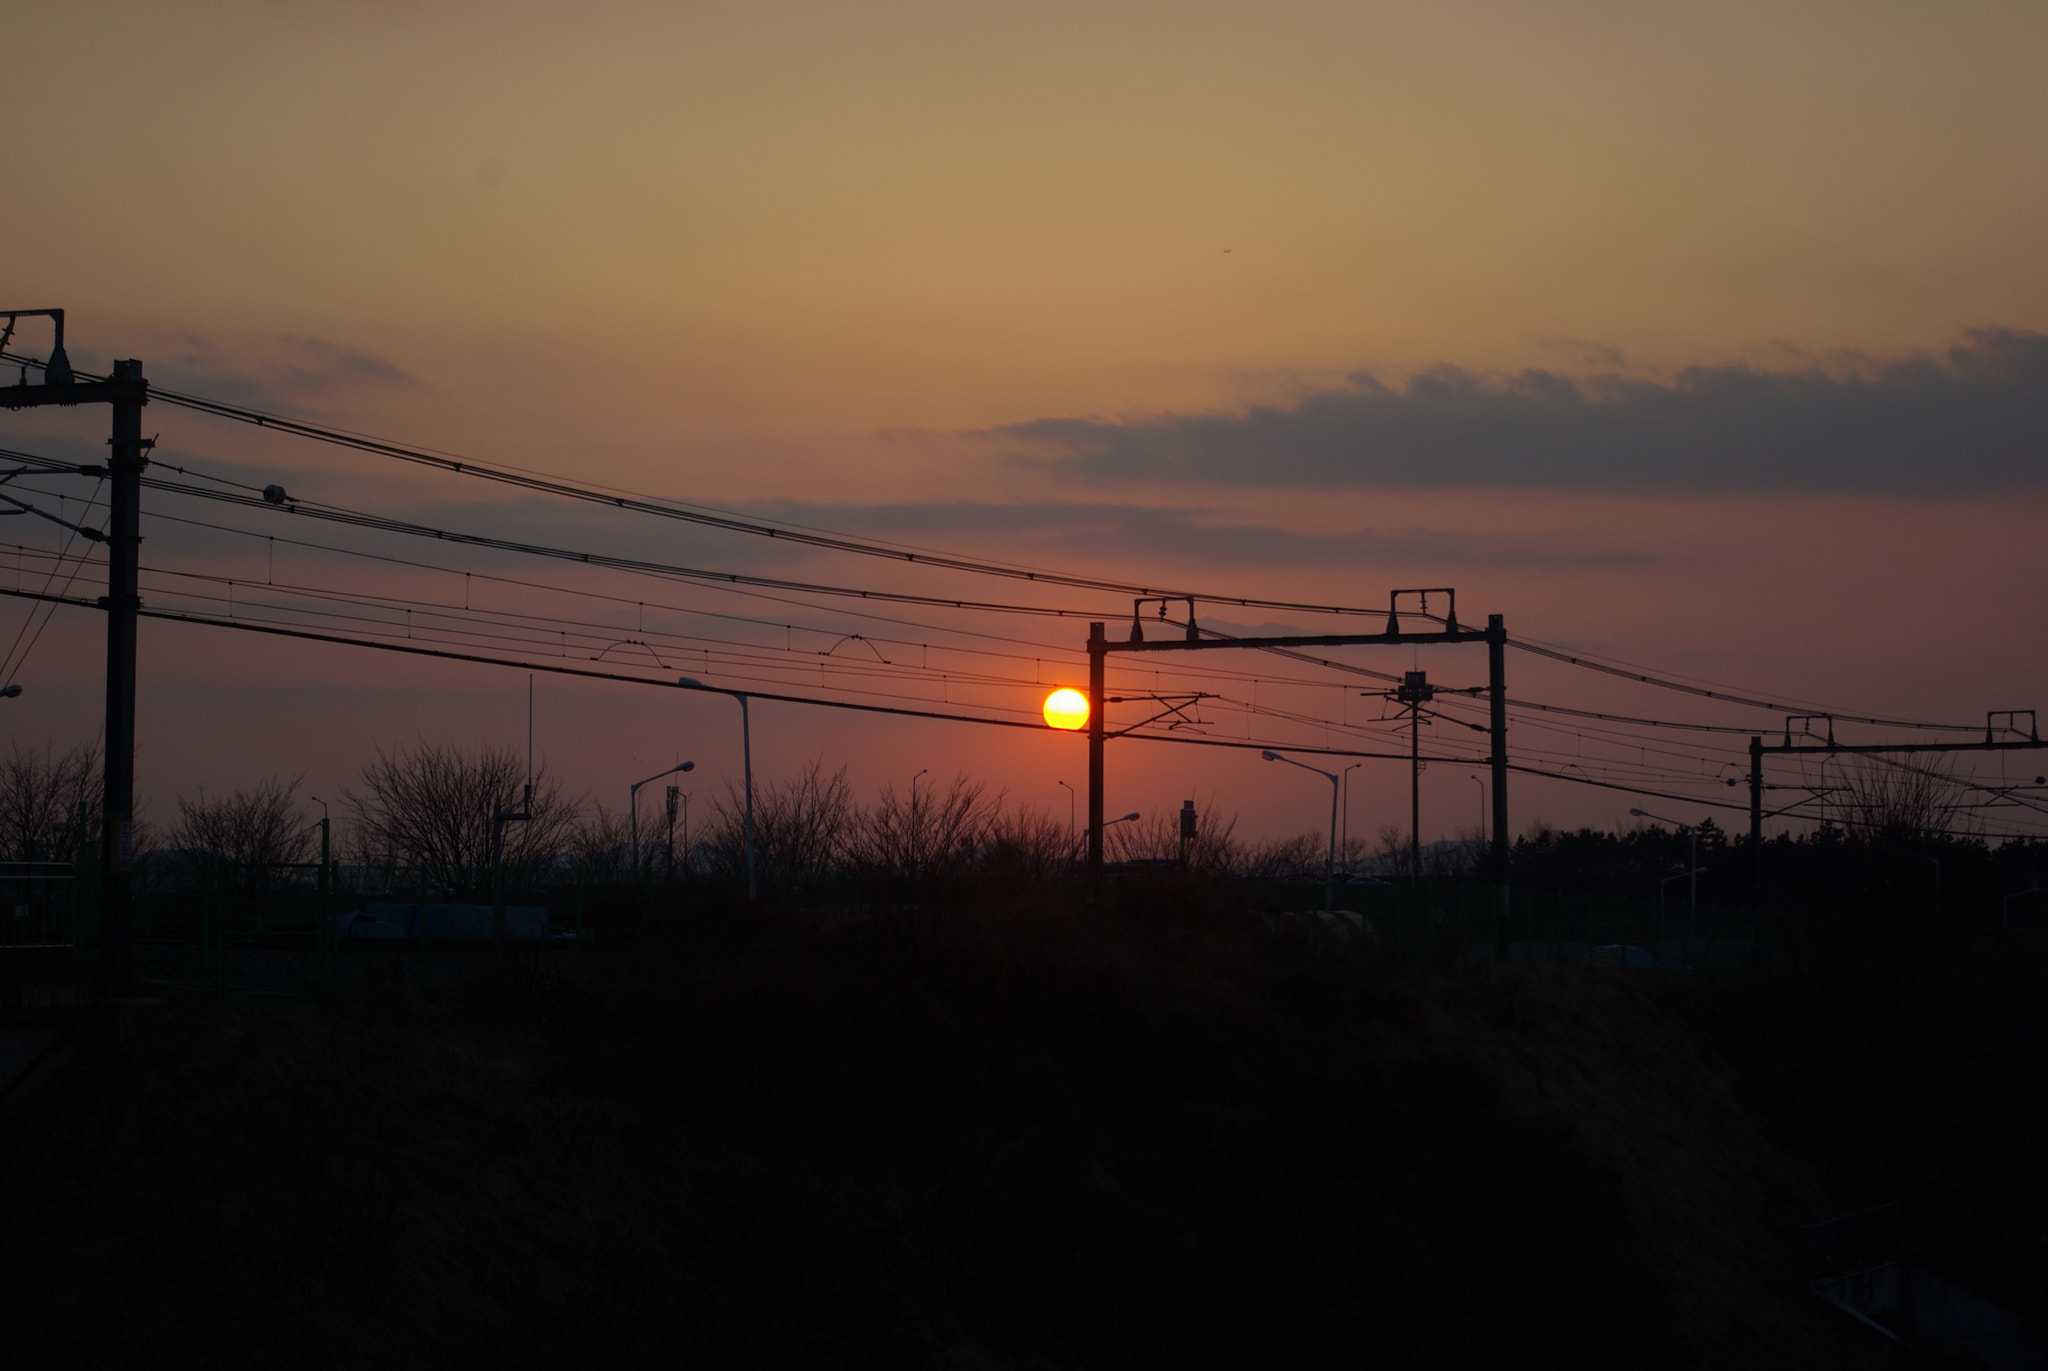 Samsung/Schneider D-XENON 18-55mm F3.5-5.6 sample photo. Sunset and railroad photography